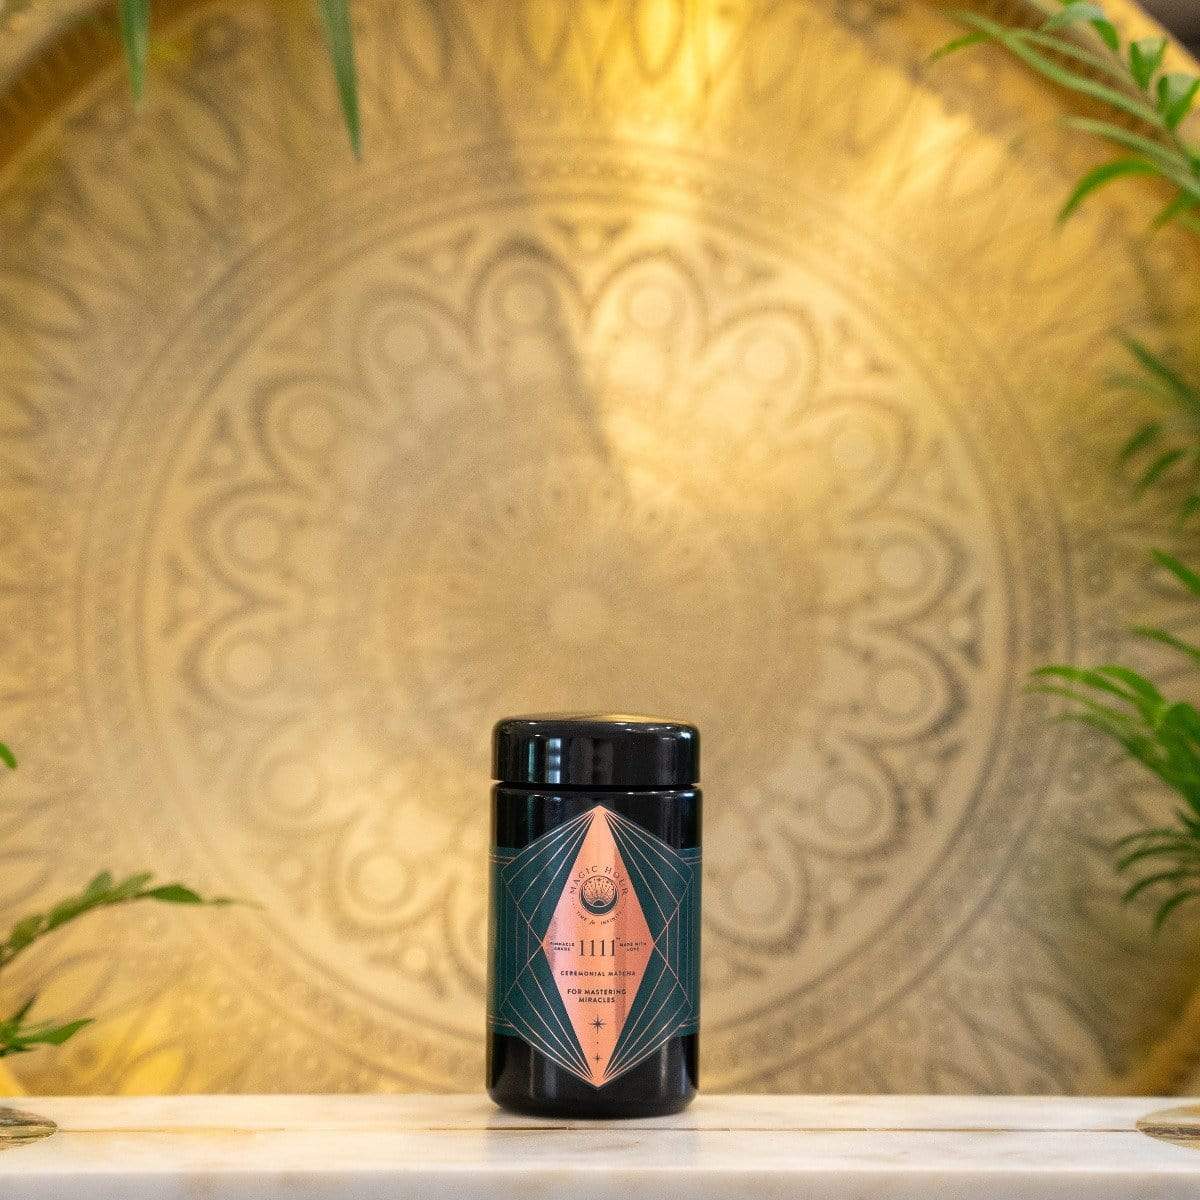 A black cylindrical container labeled with geometric pink and green designs rests on a white surface. In the background, an ornate, circular golden pattern adorns the wall, framed by green plants on either side. This serene and elegant setting perfectly complements your Matcha 1111 : Gift Set experience by Magic Hour.


